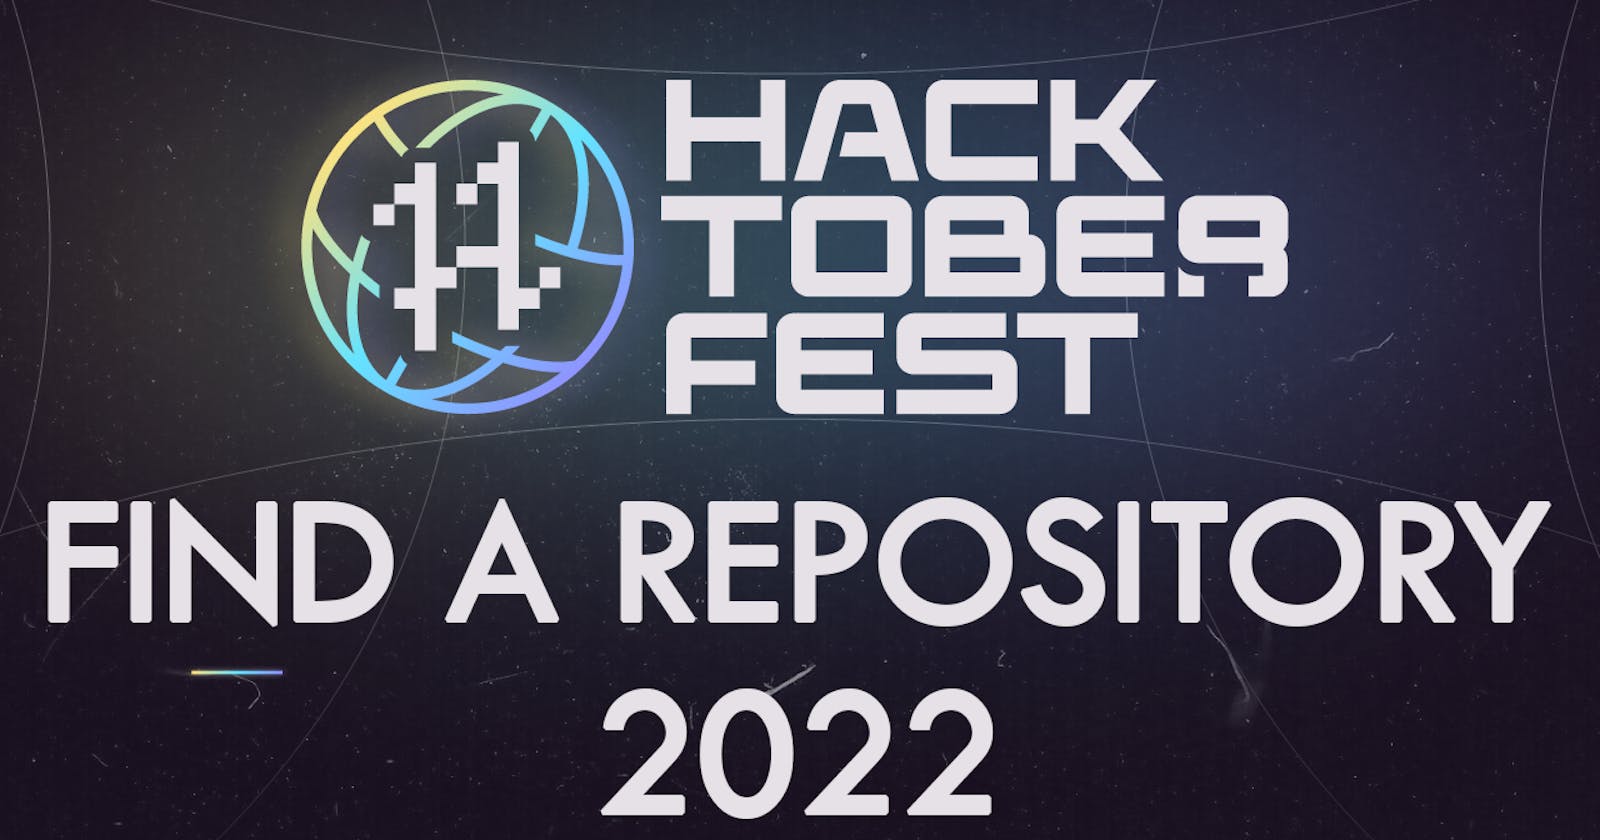 How to find a repository for Hacktoberfest 2022